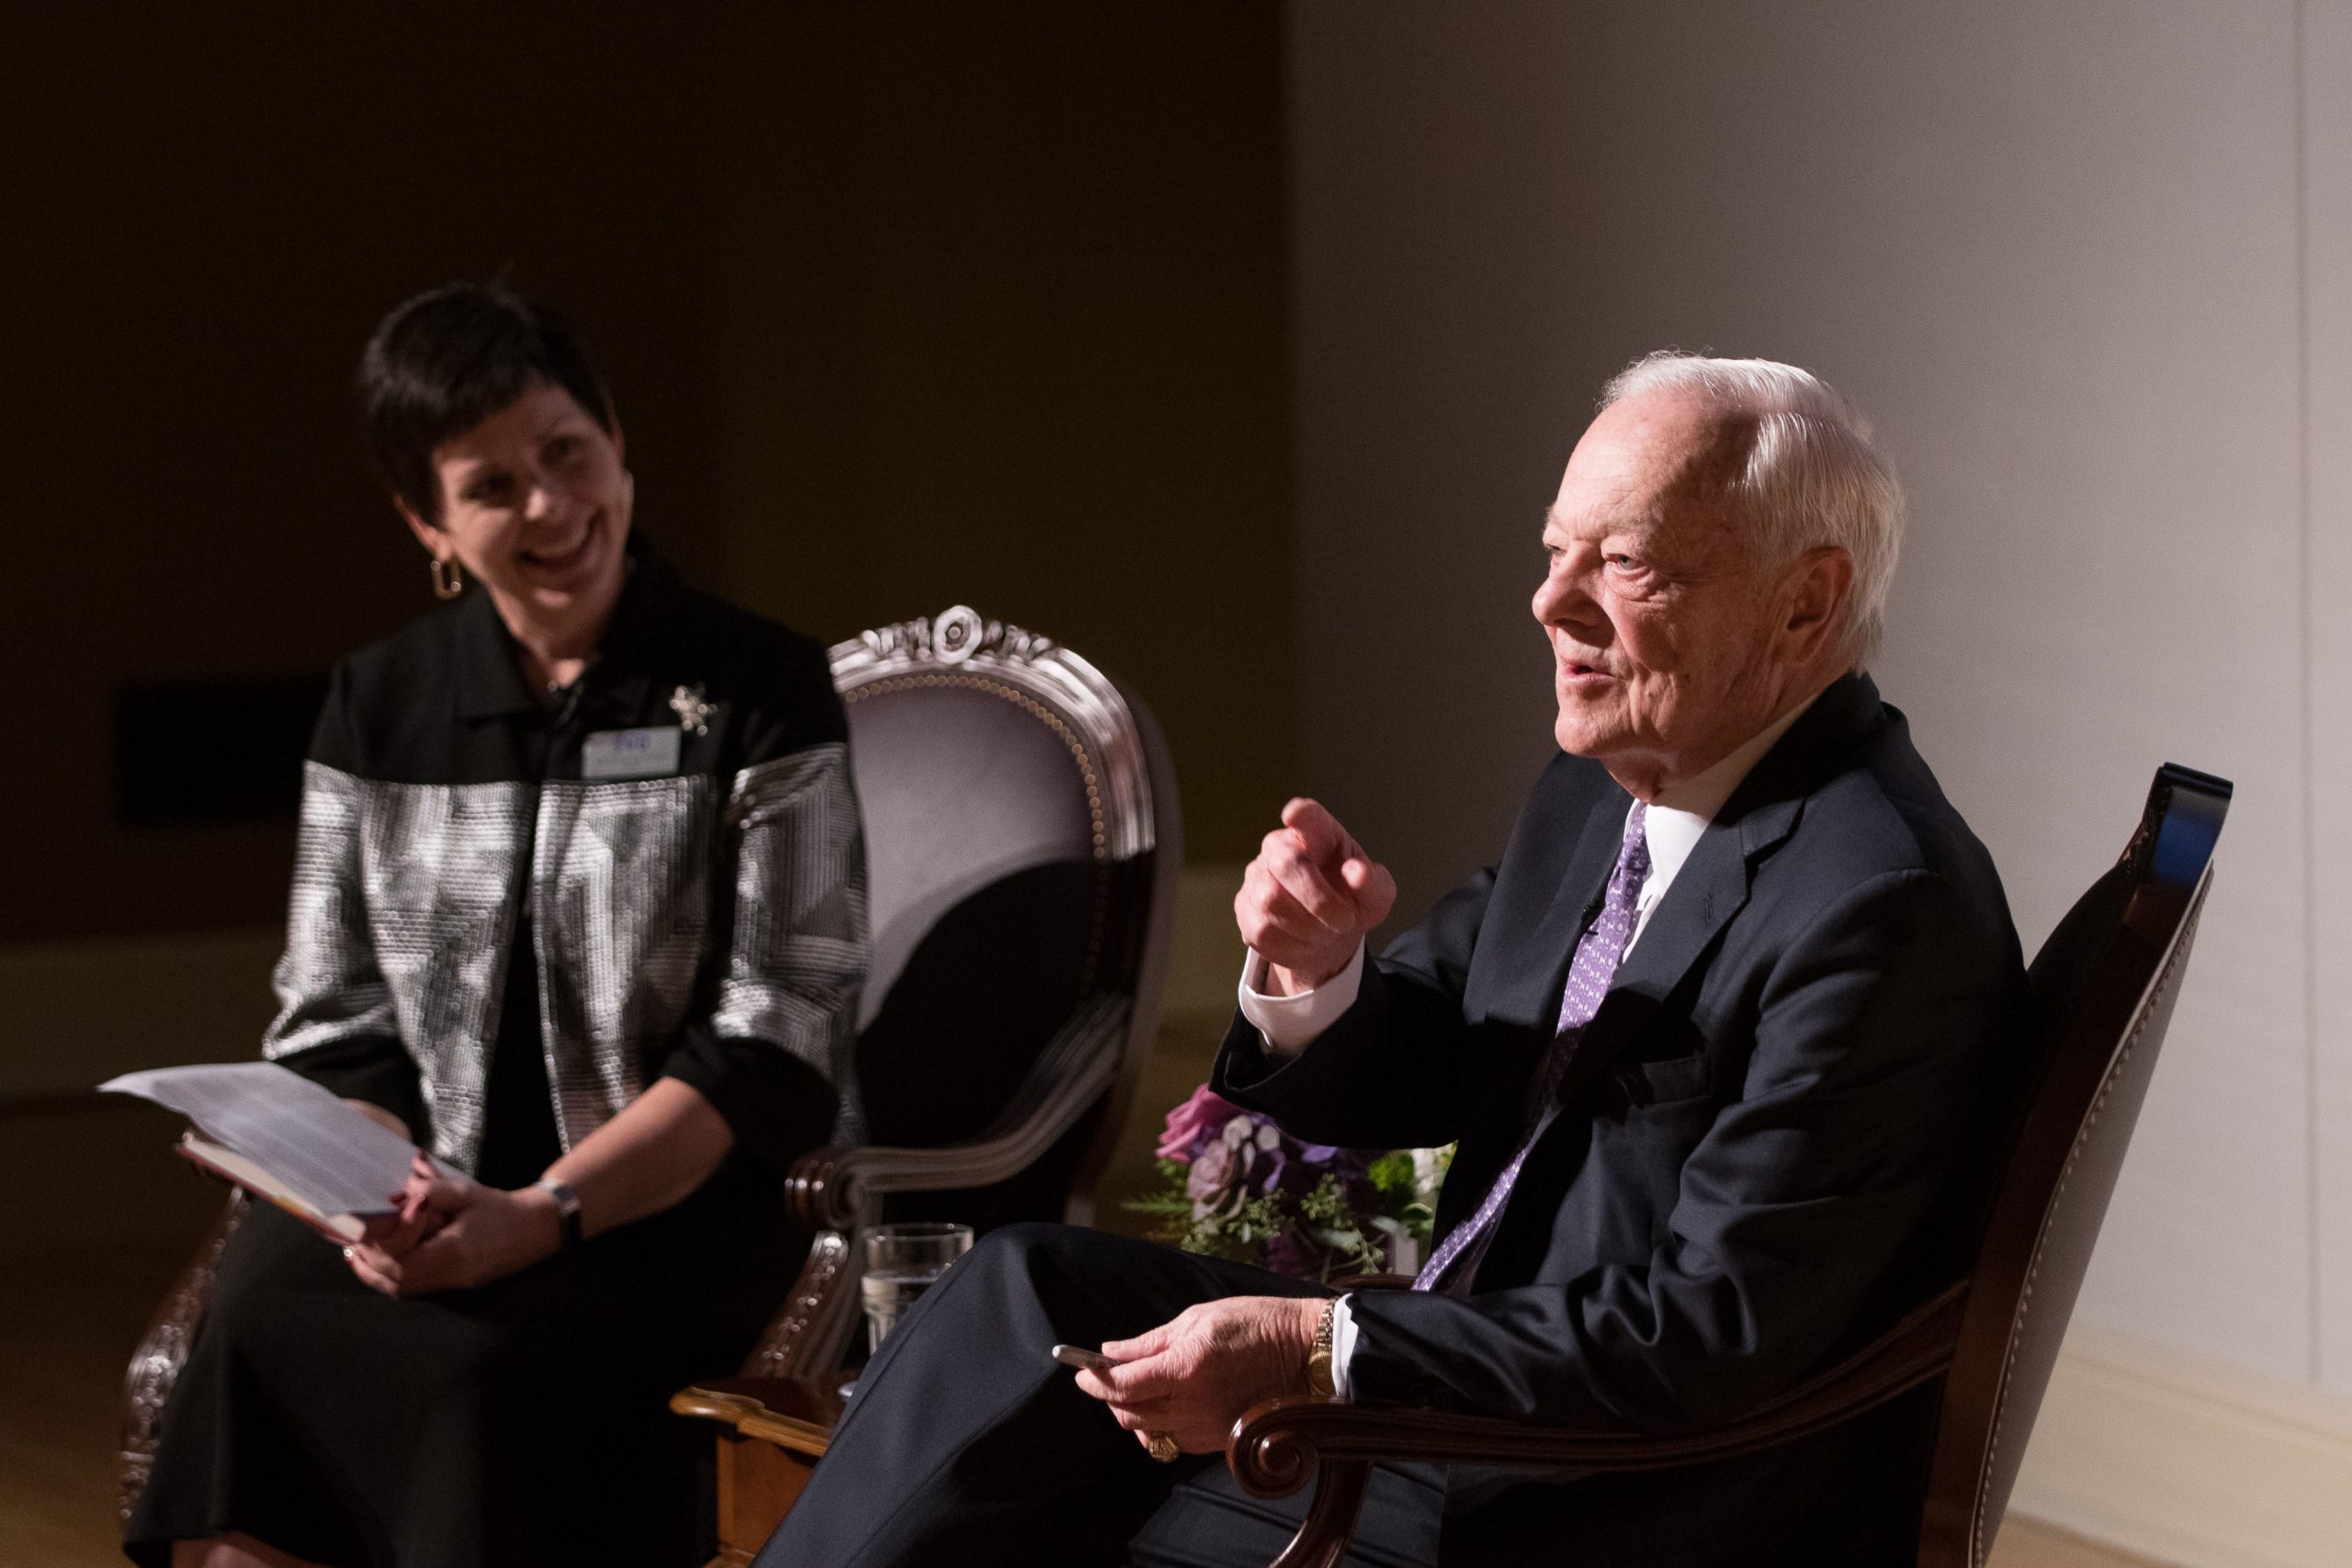 Kris Bunton interviewed Bob Schieffer in TCU’s Brown-Lupton University Union after the 2017 release of his book Overload: Finding the Truth in Today’s Deluge of News. Courtesy of Bob Schieffer College of Communication | Photo by Glen E. Ellman